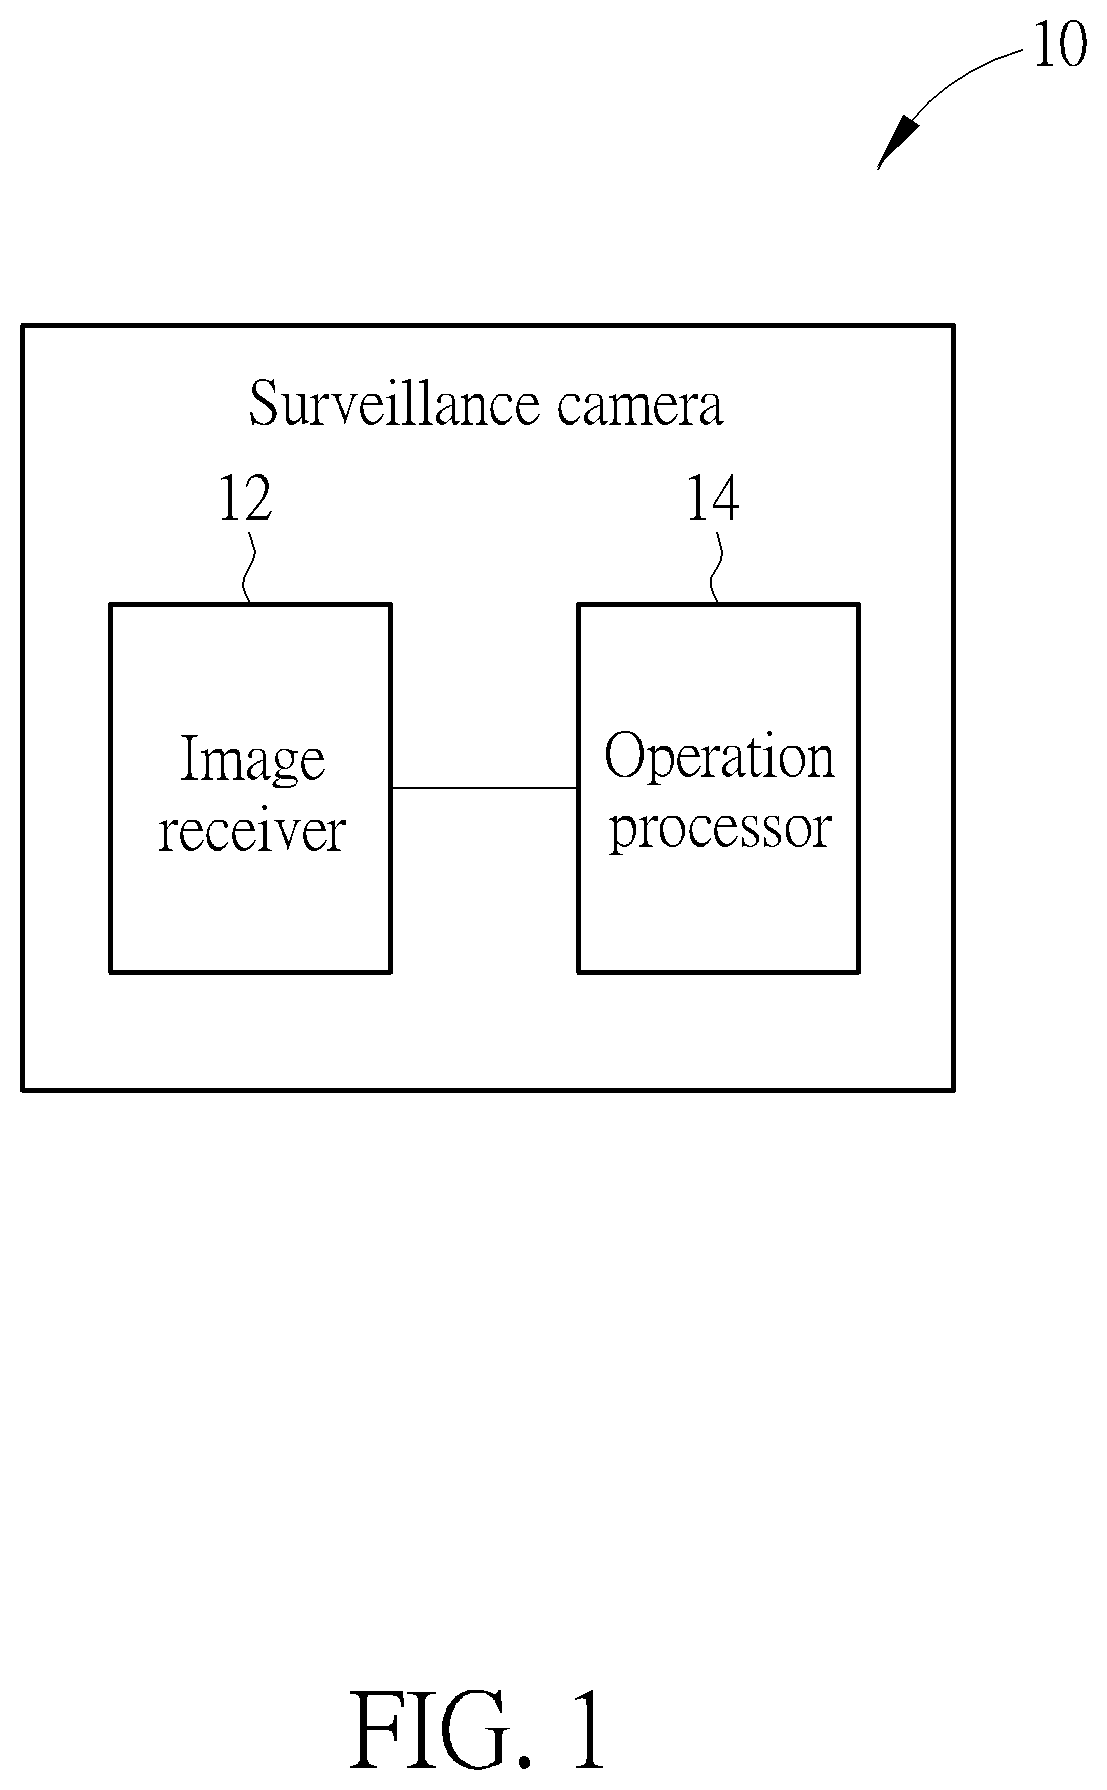 Object counting method and surveillance camera